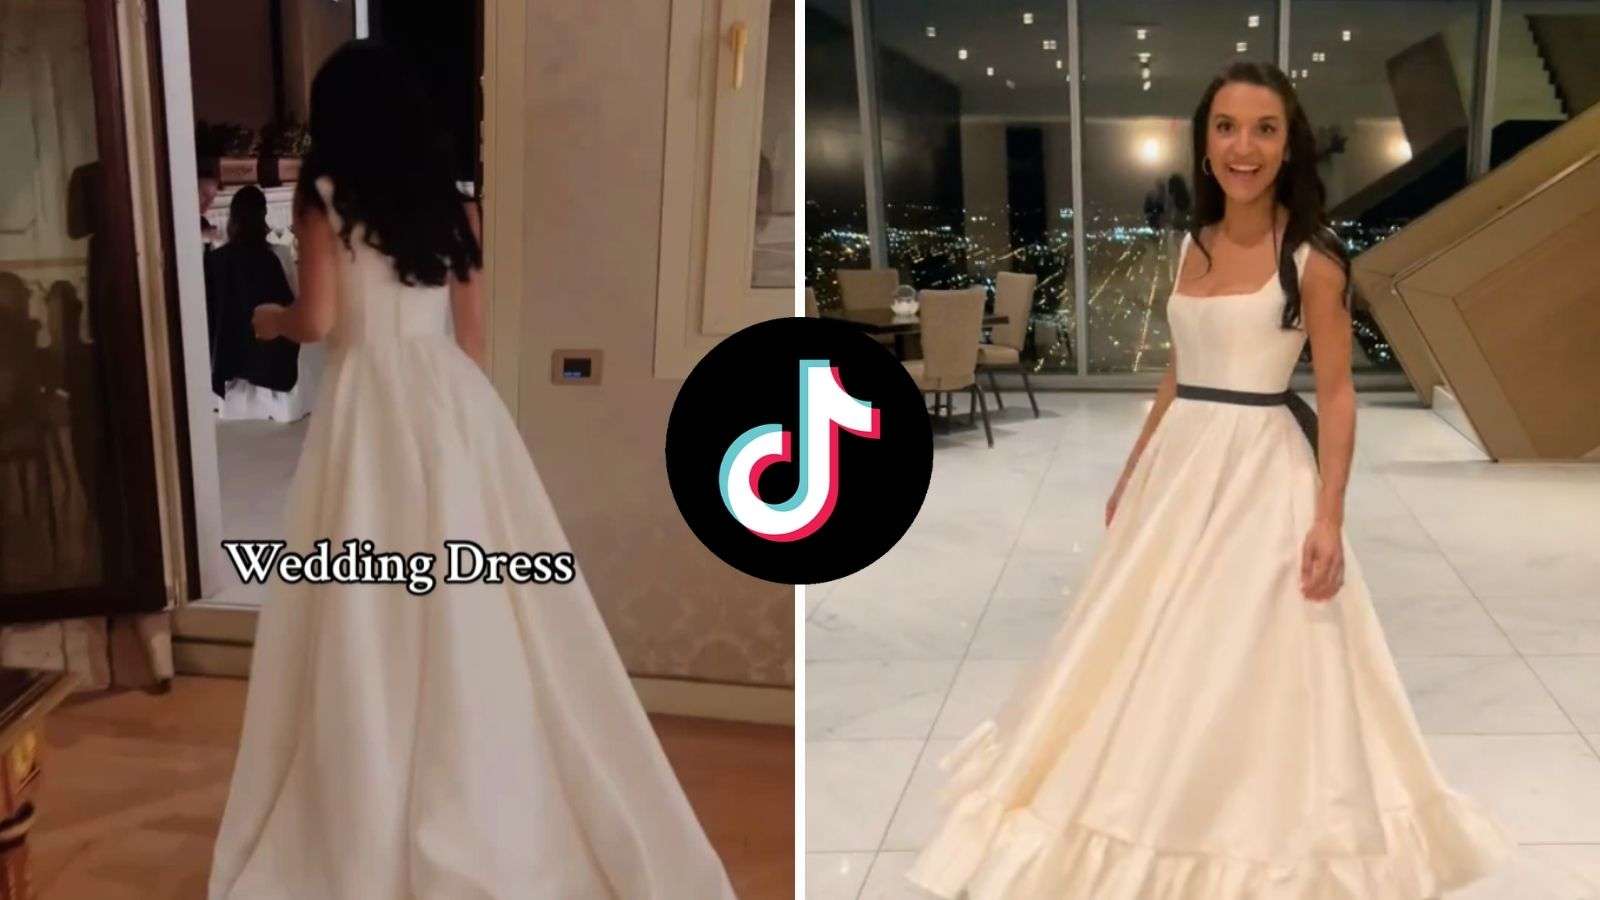 Woman sparks backlash for wearing wedding dress to sister’s nuptials